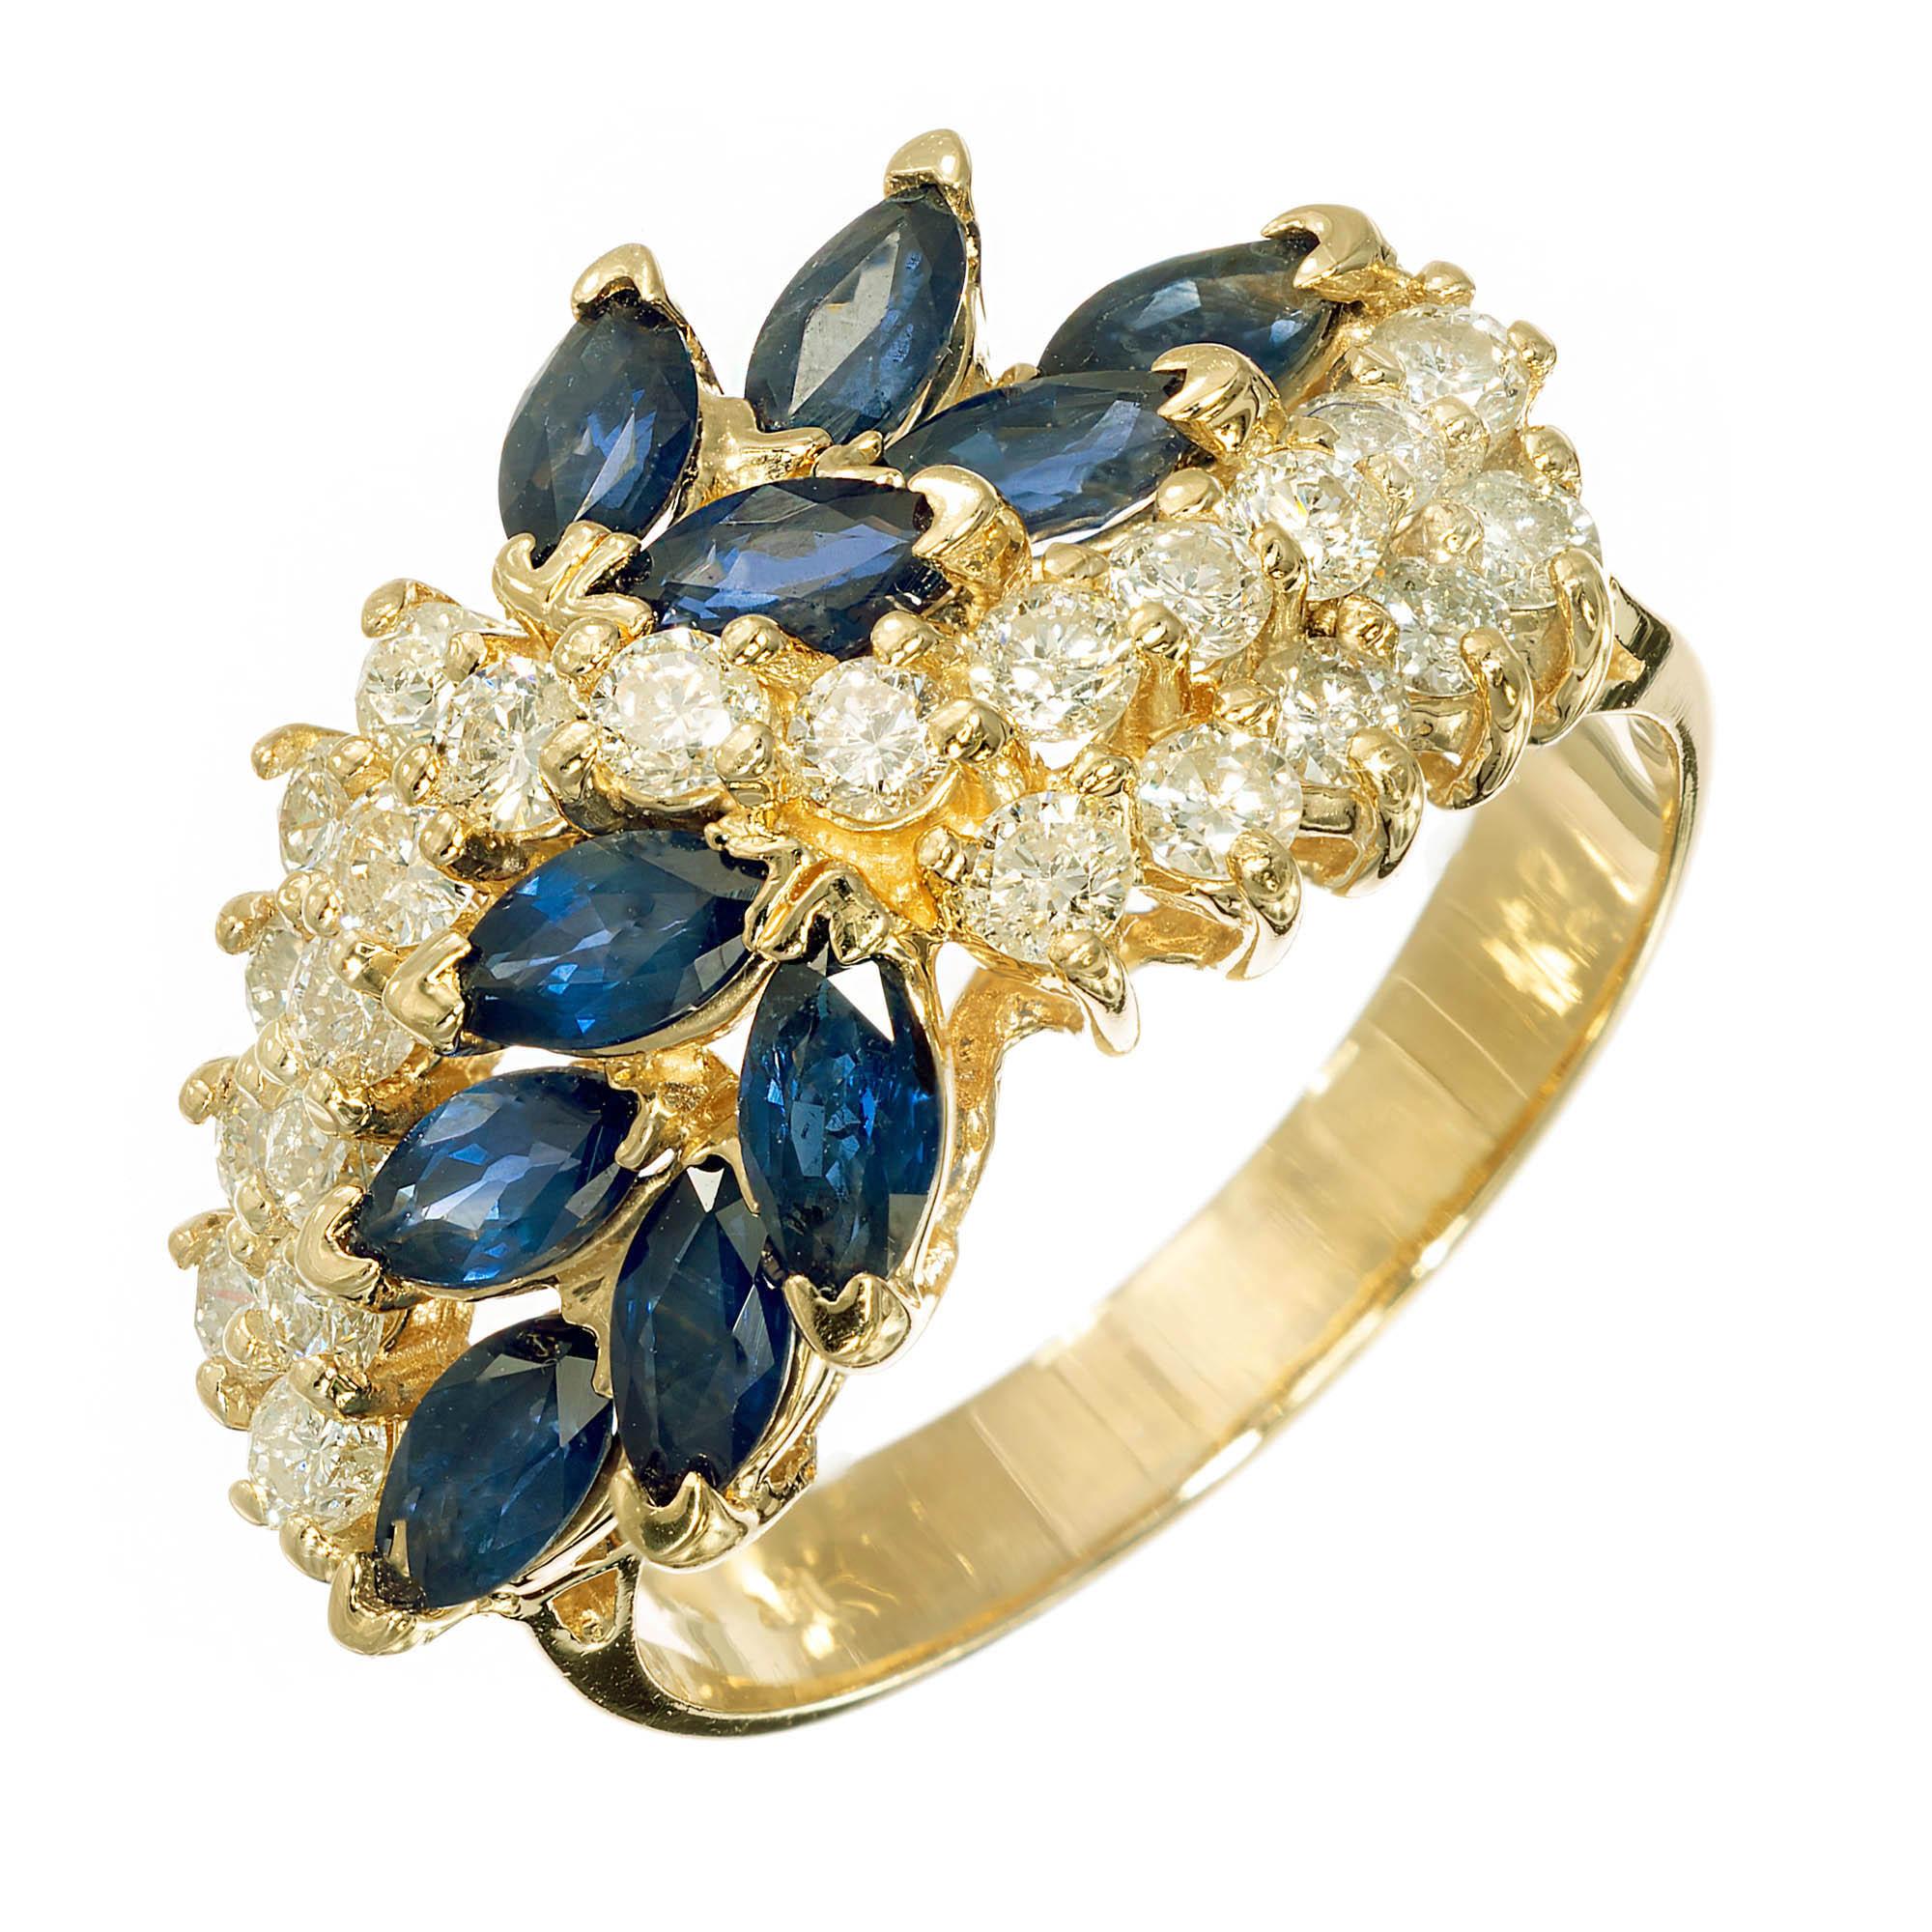 Sapphire and diamond wave ring. round brilliant cut diamonds set in 14k yellow gold accented by ten marquise shaped blue sapphires above and below side diamonds.

10 marquise blue sapphires Approximate 1.30 carats
23 round H-I SI diamonds